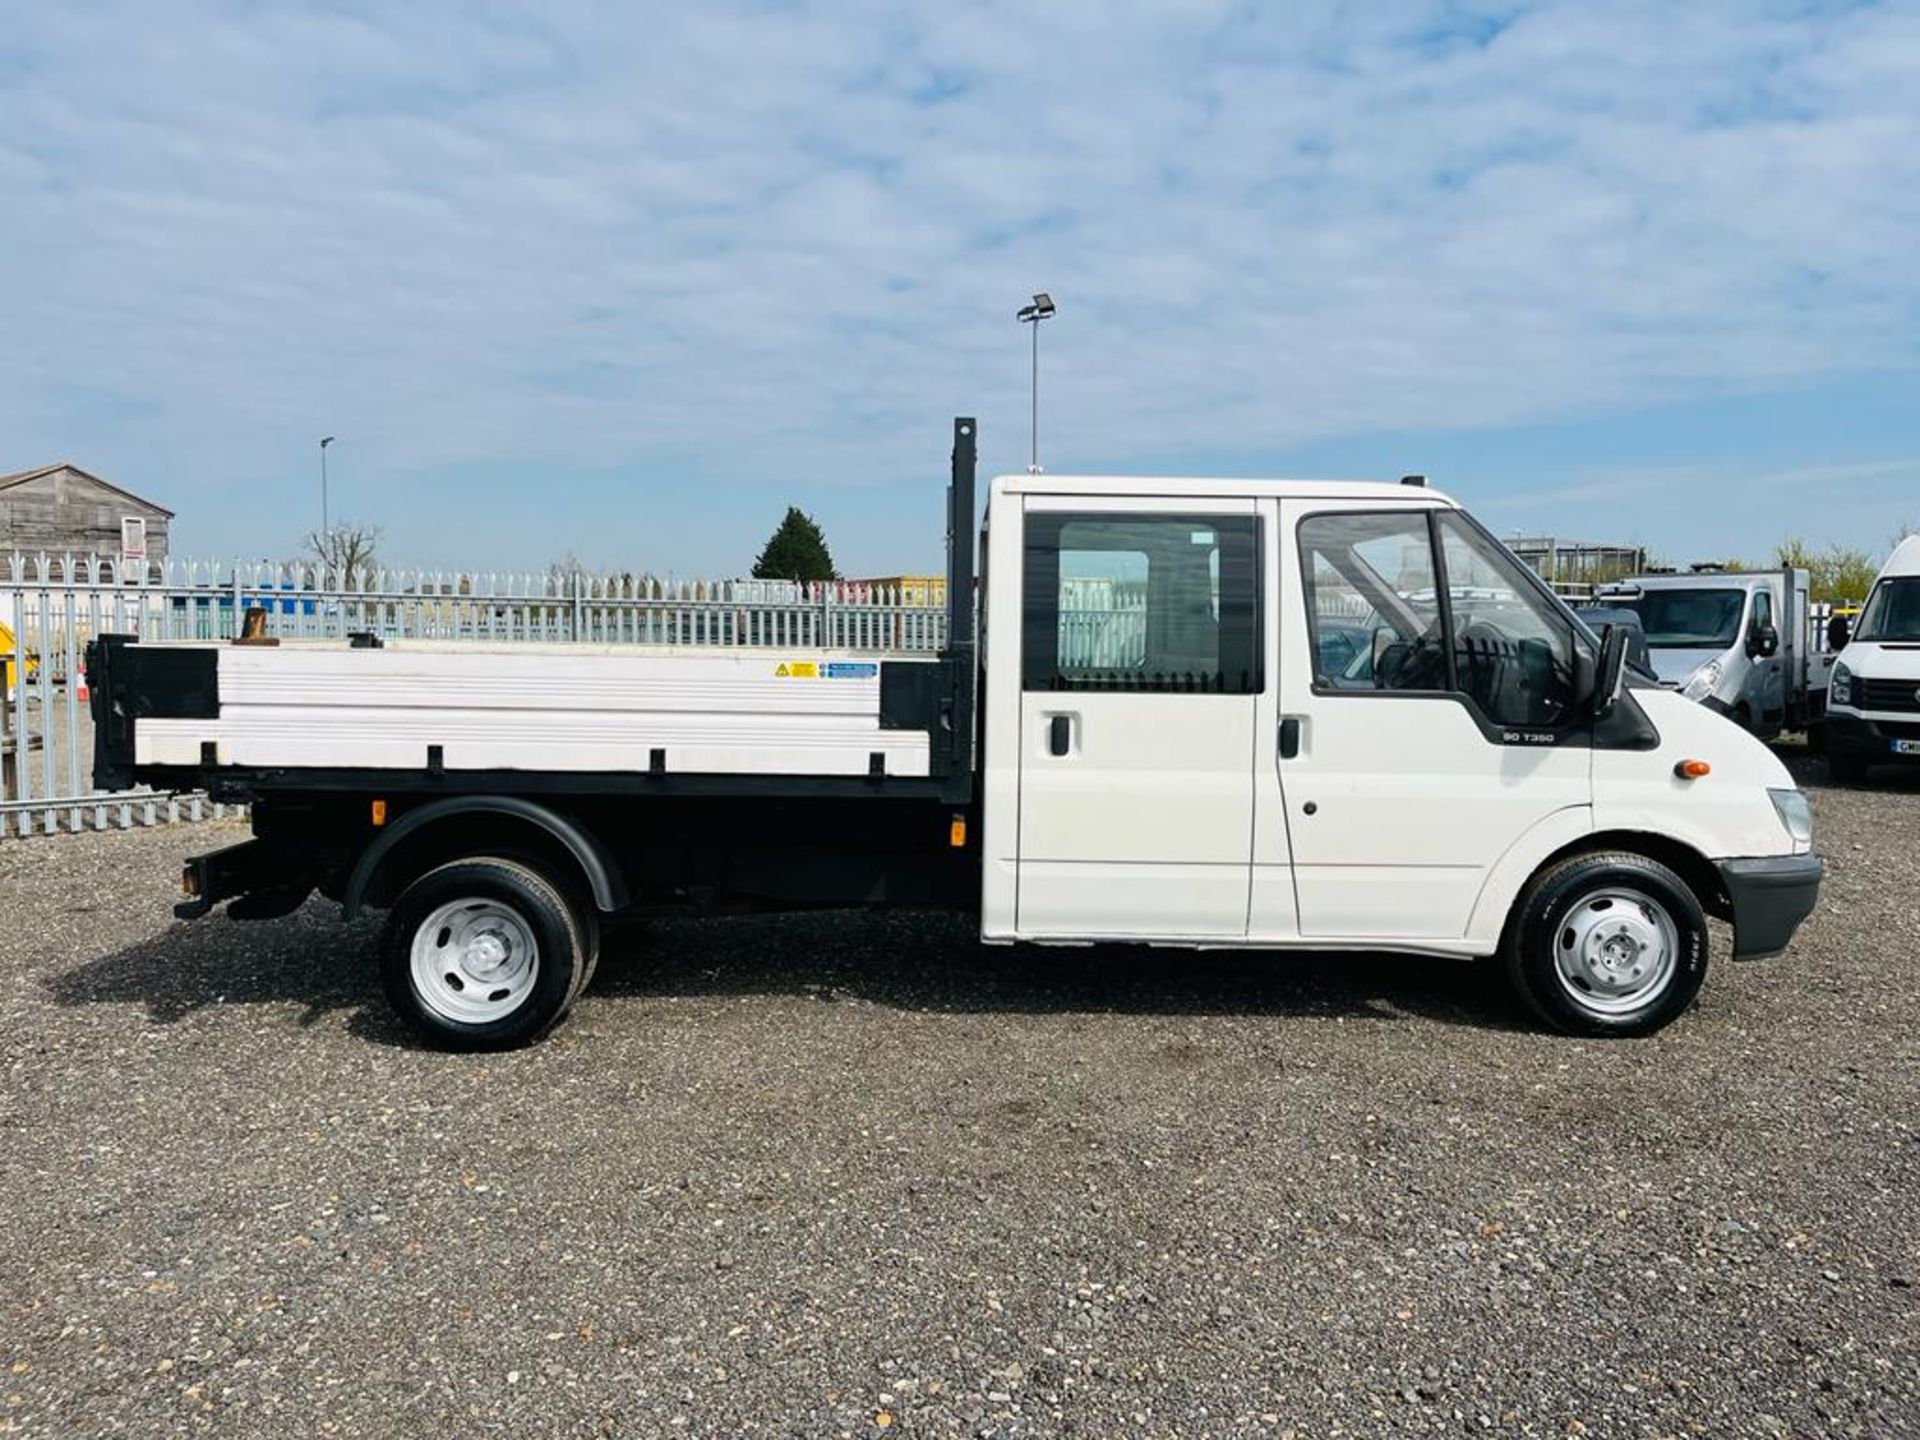 ** ON SALE ** Ford Transit 2.4 TD 350 Tipper Crew Cab 2006 '06 Reg' - Twin Rear Axle - NO VAT - Image 8 of 23